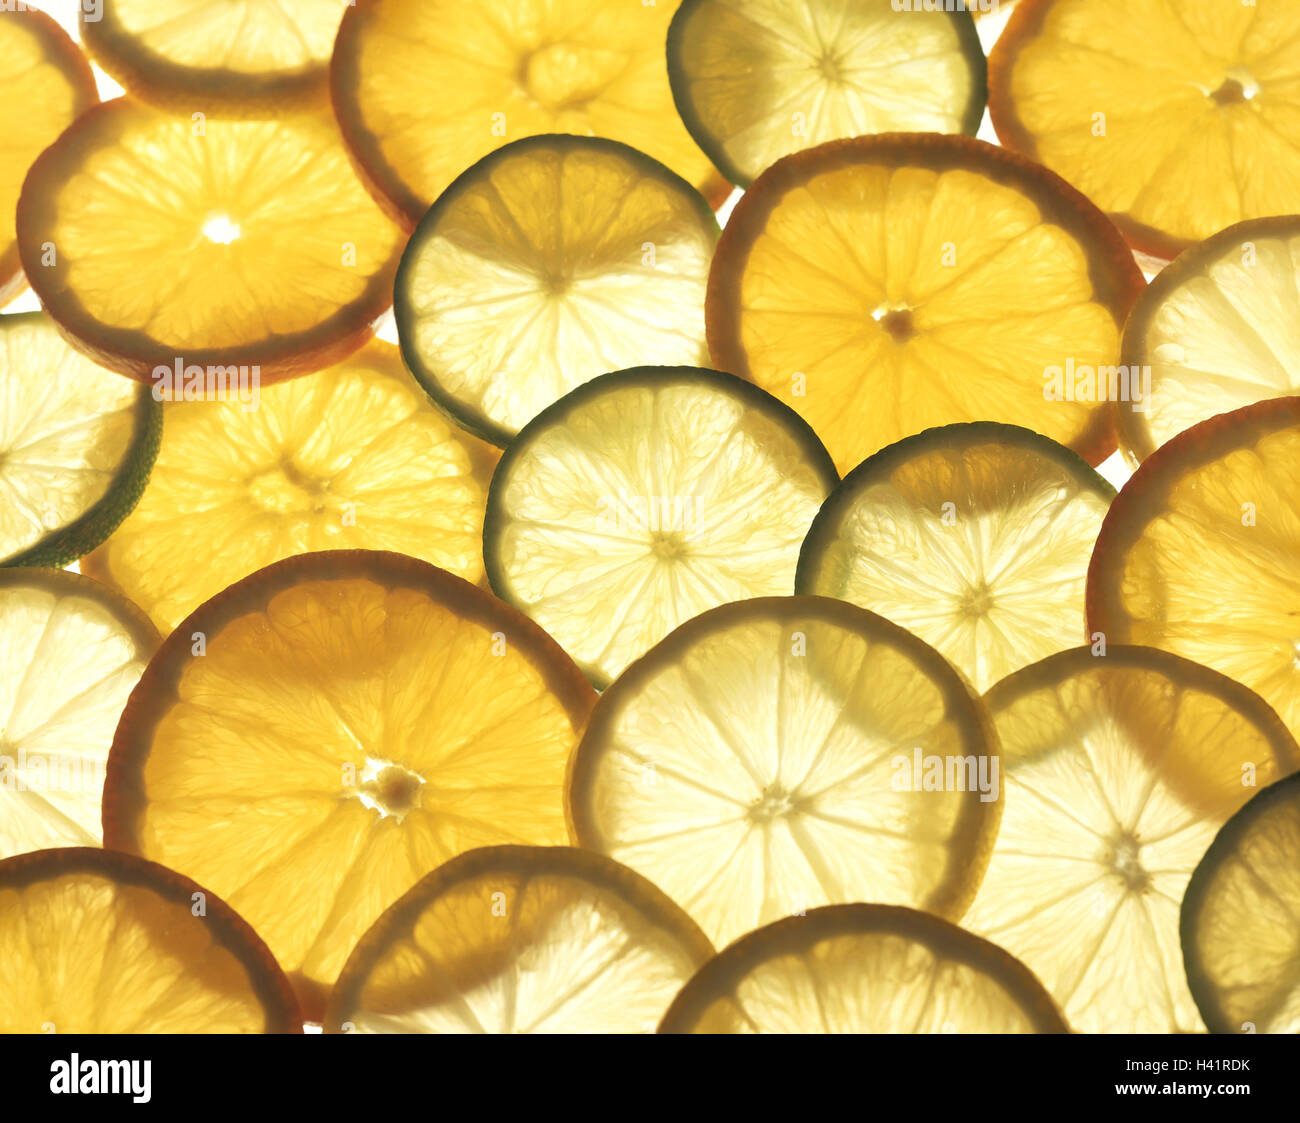 Oranges, limes, lemons, slices, transmitted light, fruits, tropical fruits, fruit, slices of orange, lime slices, cut open, food, nutrition healthy, rich in vitamins, Food, conception, sweetly, acidly, contrast, huge number, amount, Still life, material r Stock Photo